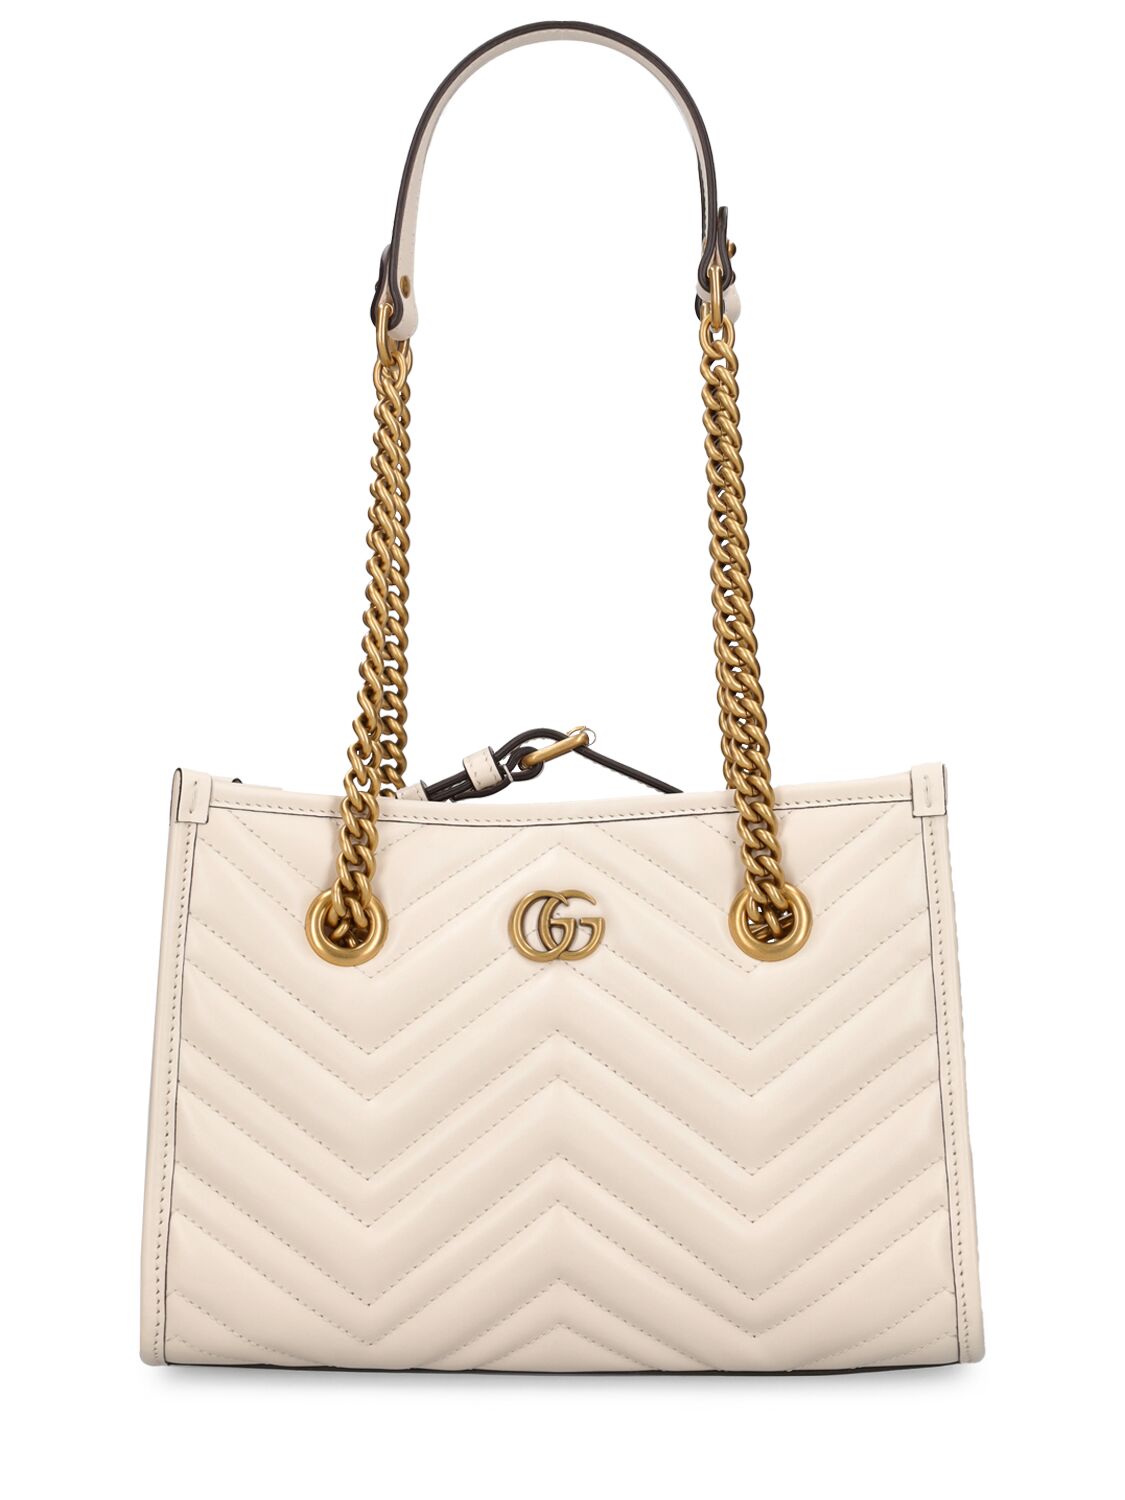 Gucci Gg Marmont Leather Tote Bag In Mystic White